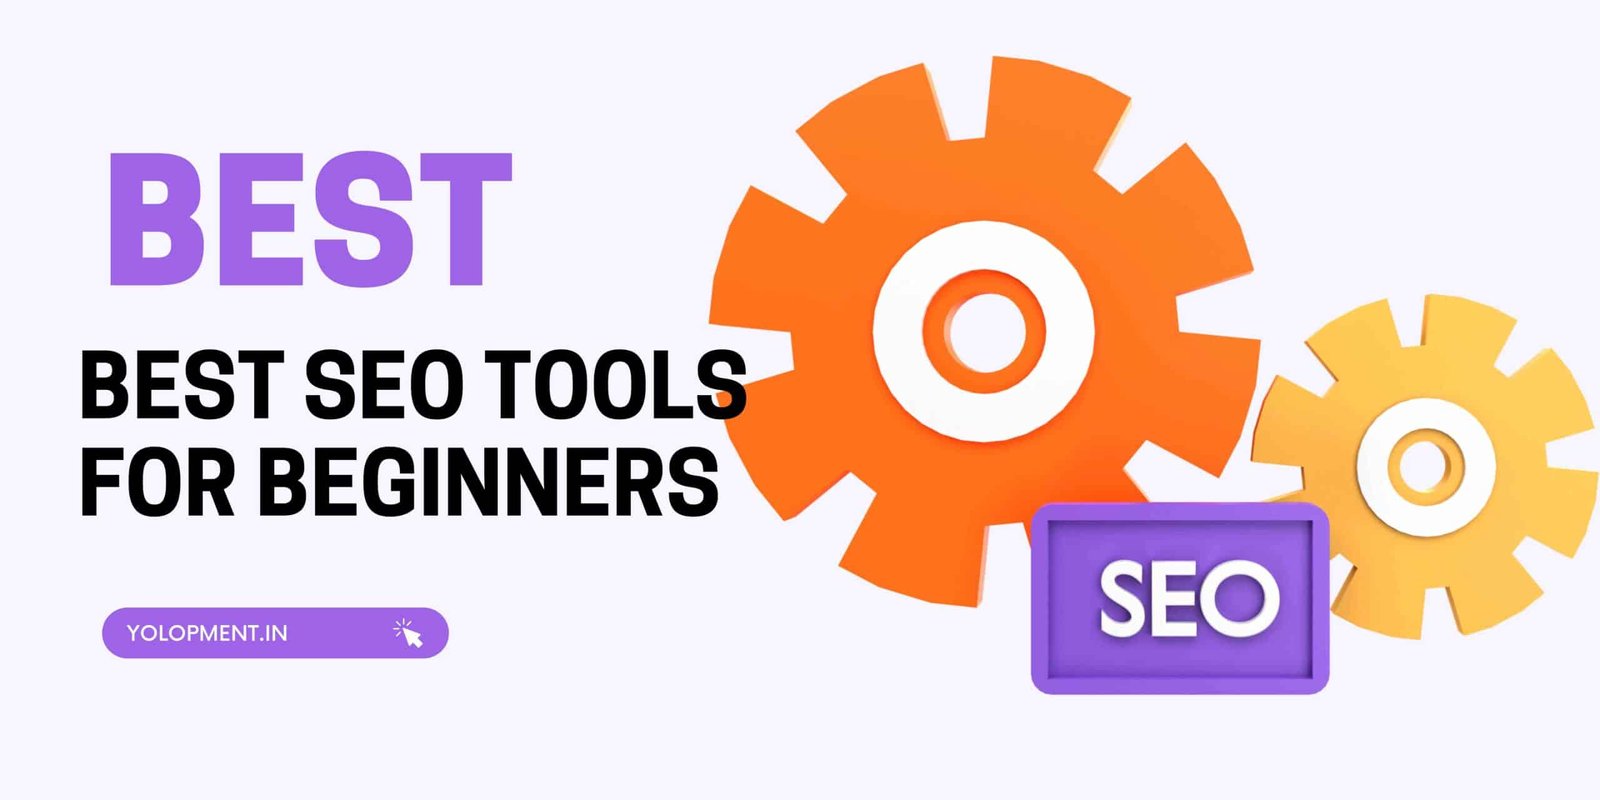 Best-SEO-Tools-for-Beginners